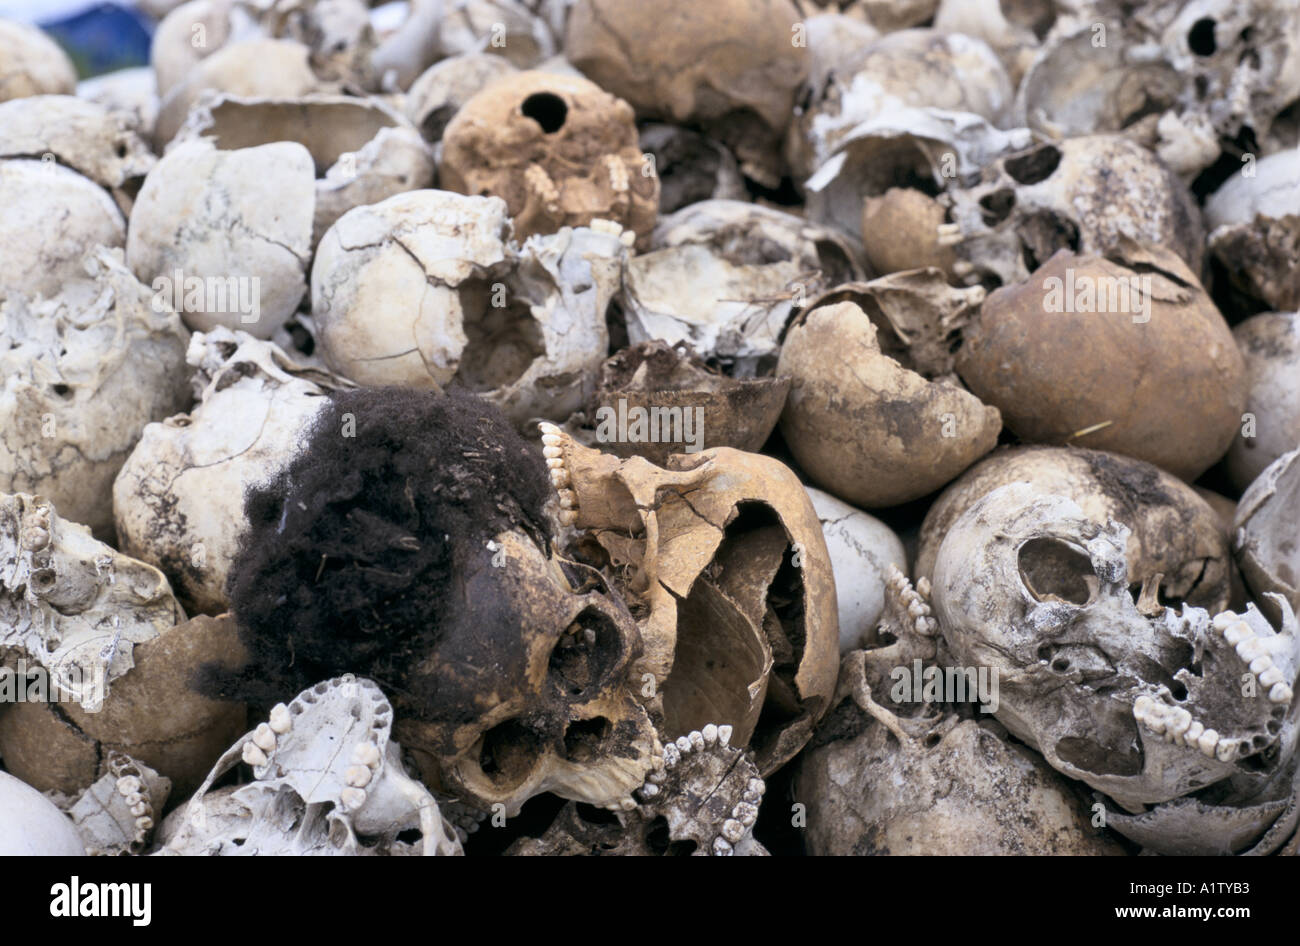 PILE OF HUMAN SKULLS REMAINS OF BISESERO MASSACRE , a small village where all but a few men were killed in the genocide. Stock Photo